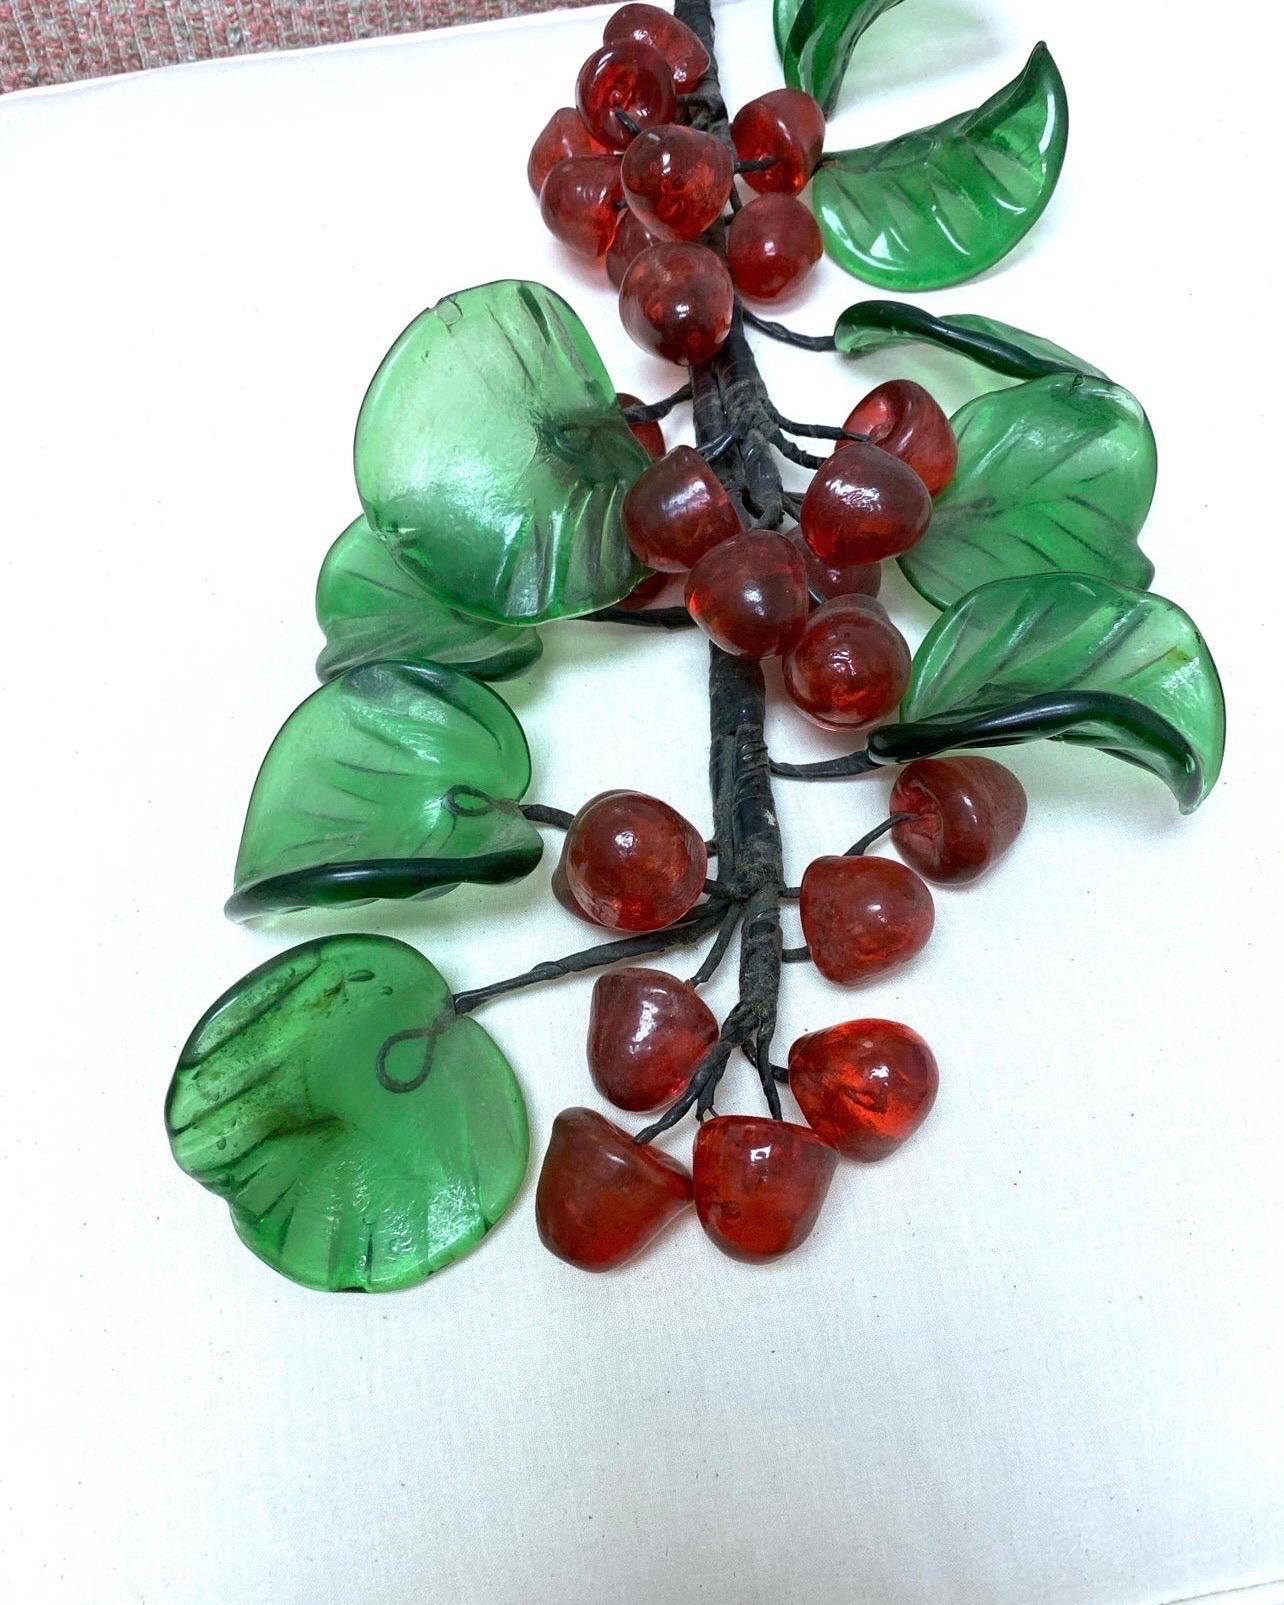 Unknown Oversized Murano Style Vintage Glass Cherry Table Top Decor For Sale